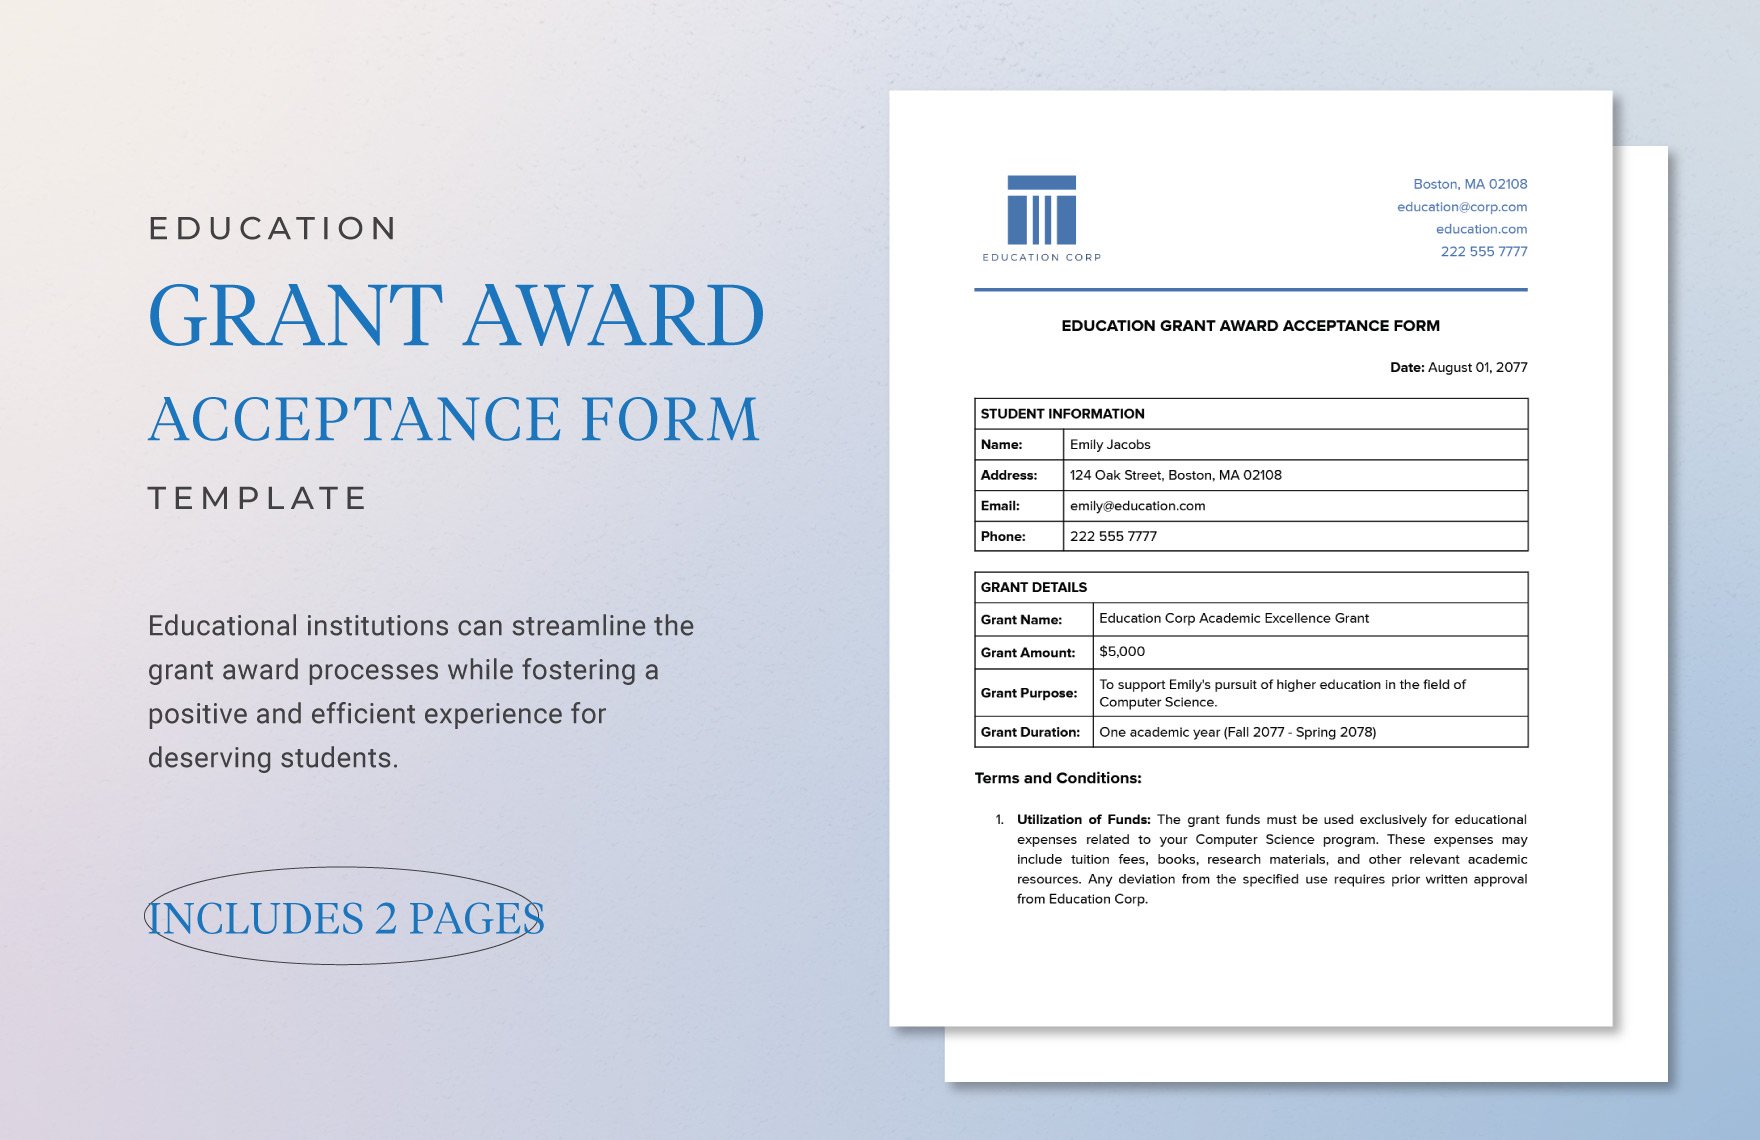 Education Grant Award Acceptance Form Template